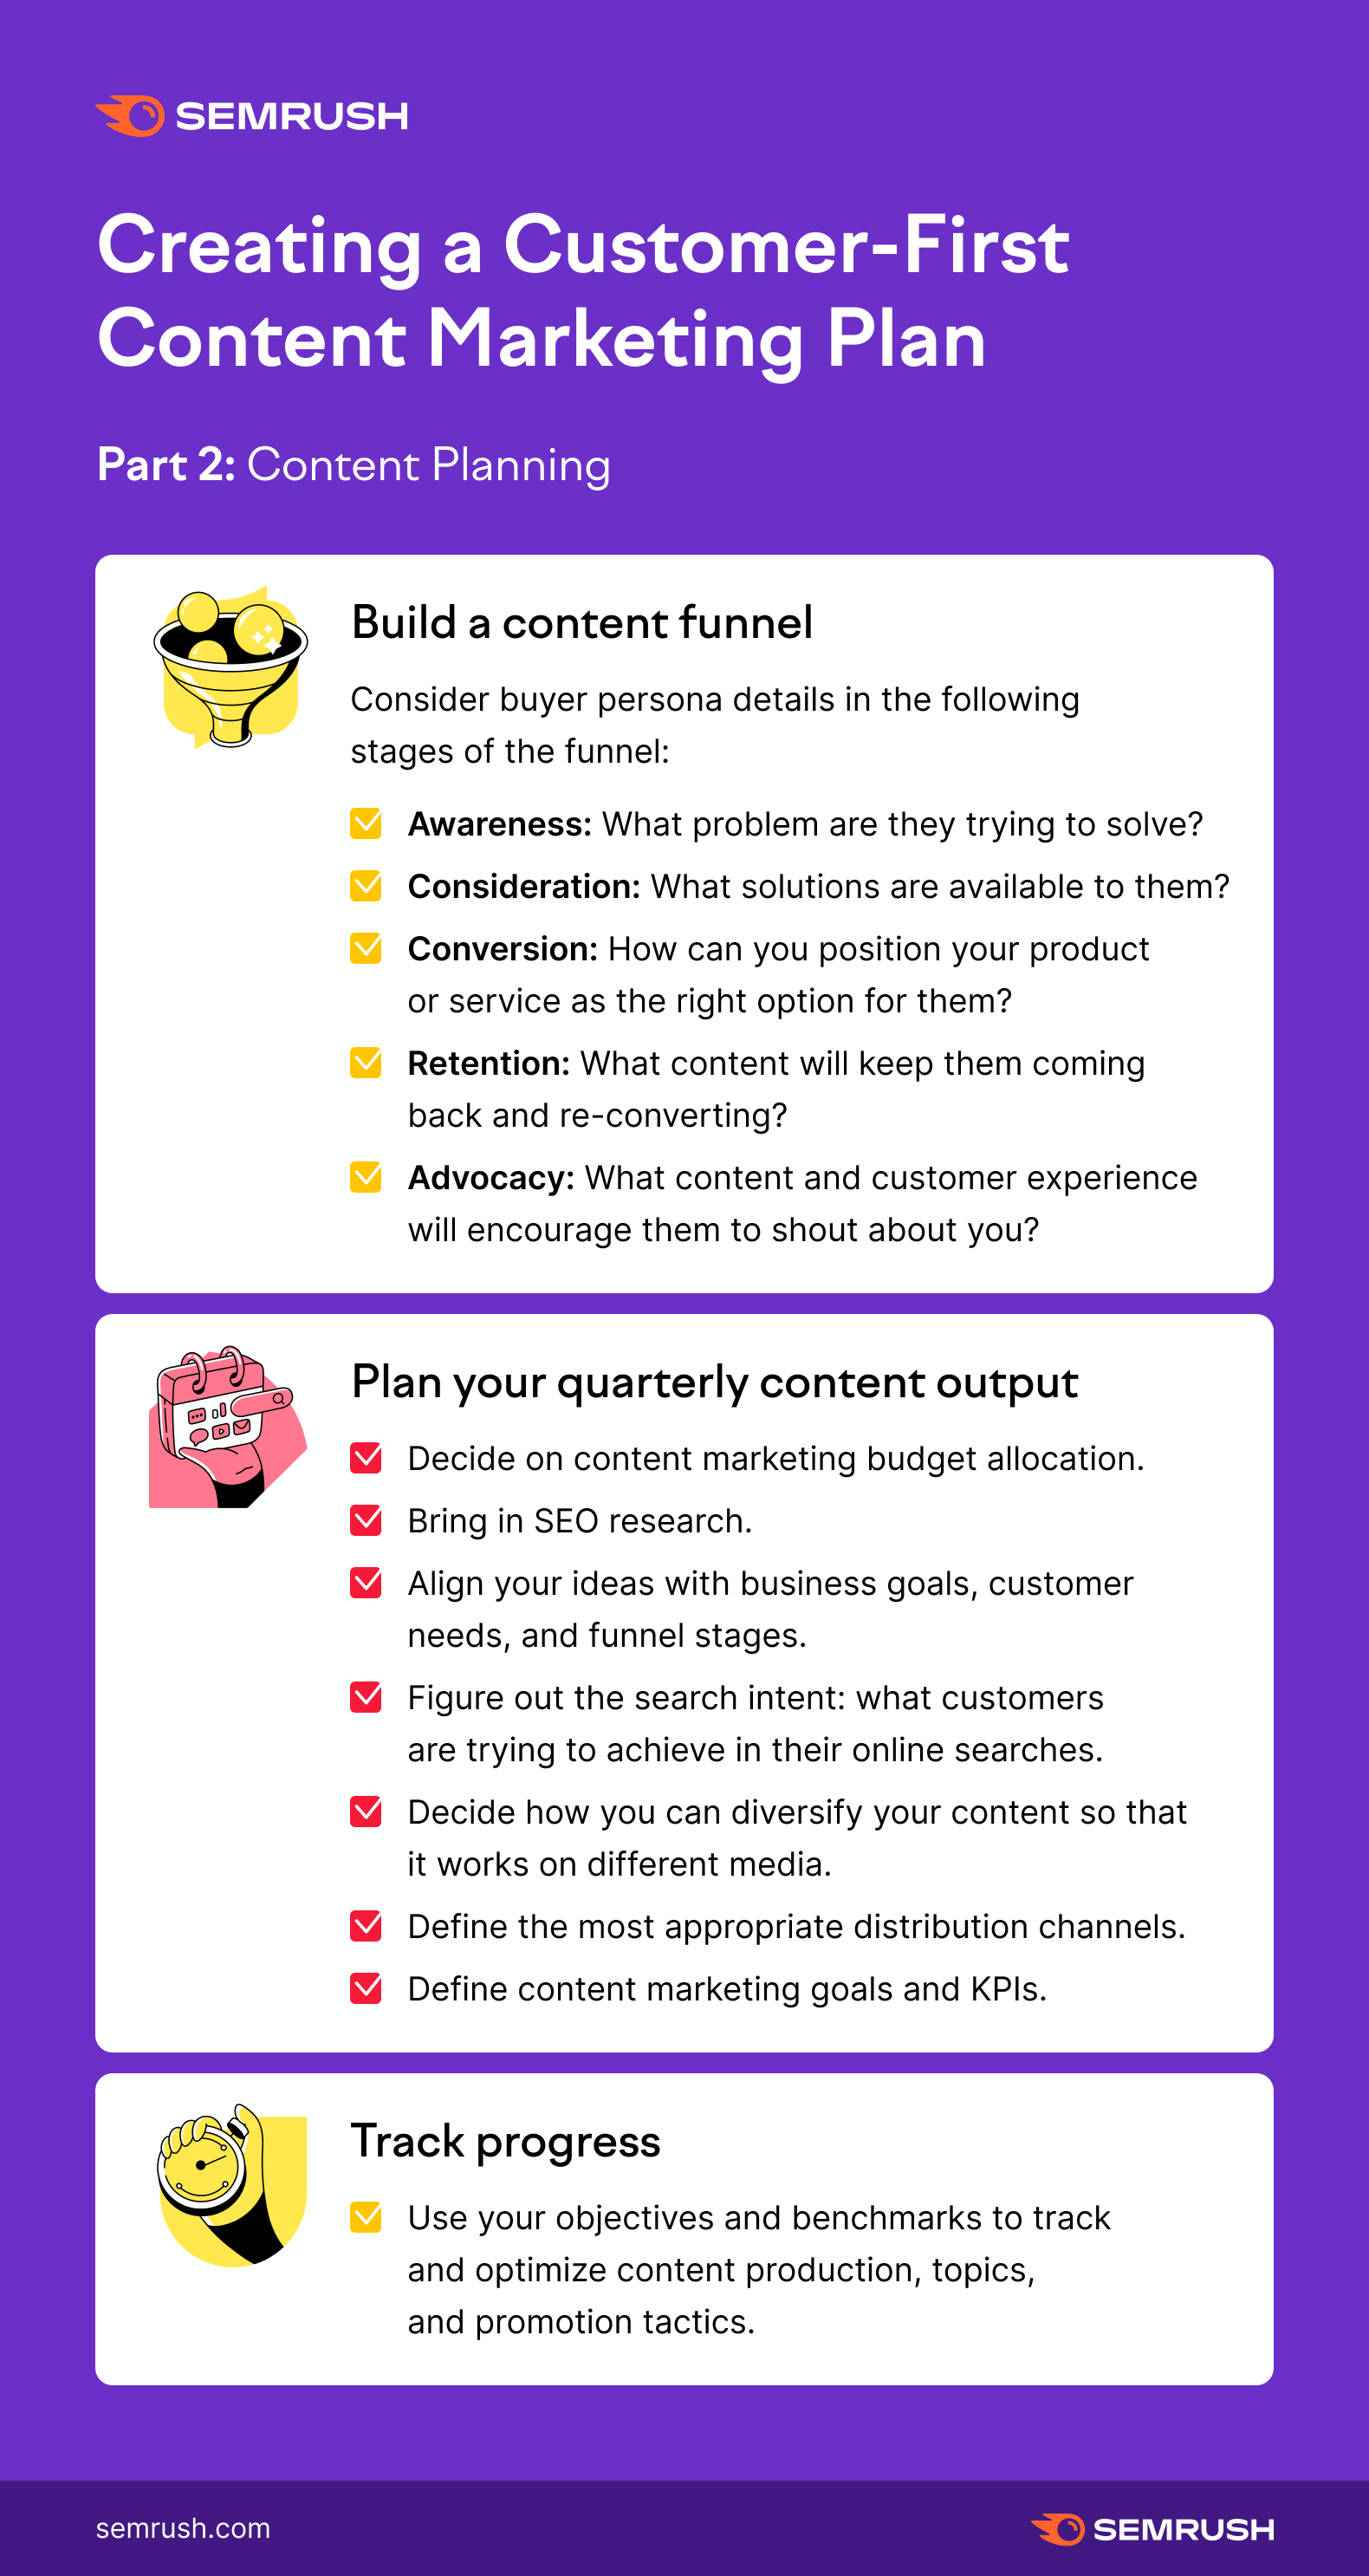 How to Create the Ultimate Customer-First Content Marketing Plan